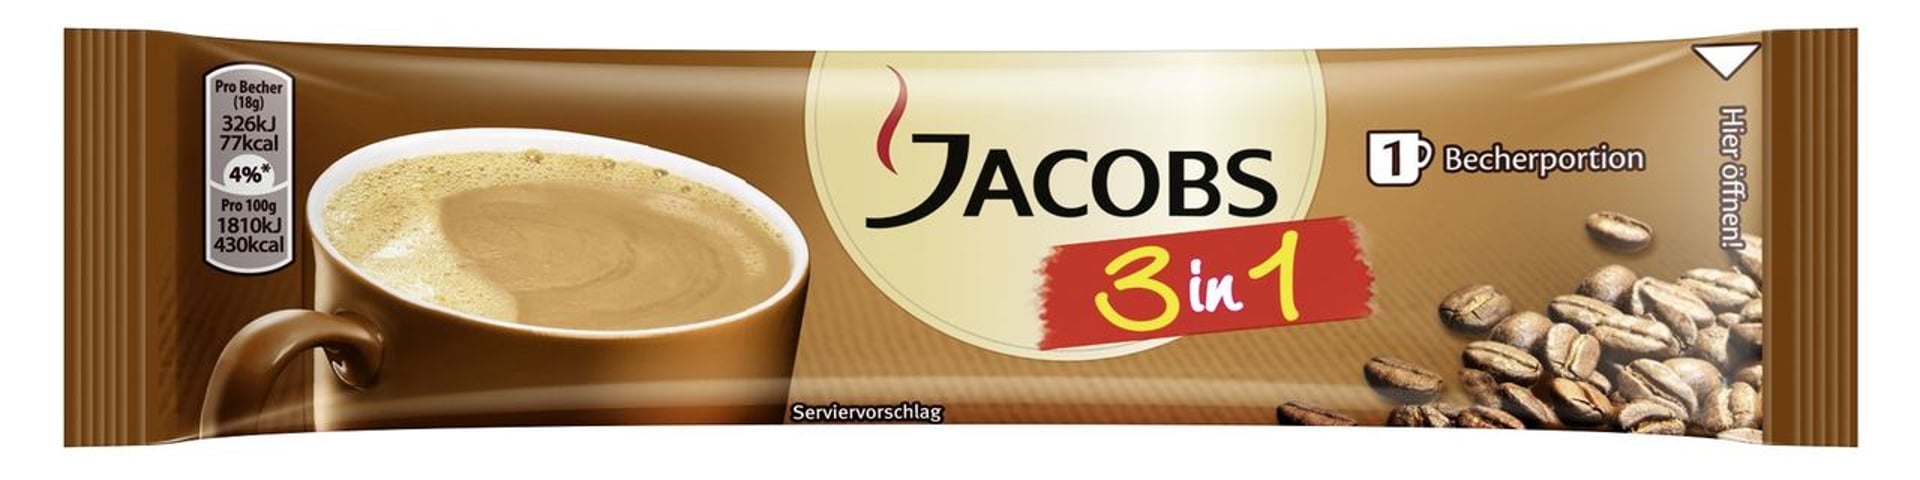 Jacobs - 3 in 1 Instant, 10 Stück á 18 g 180 g Packung